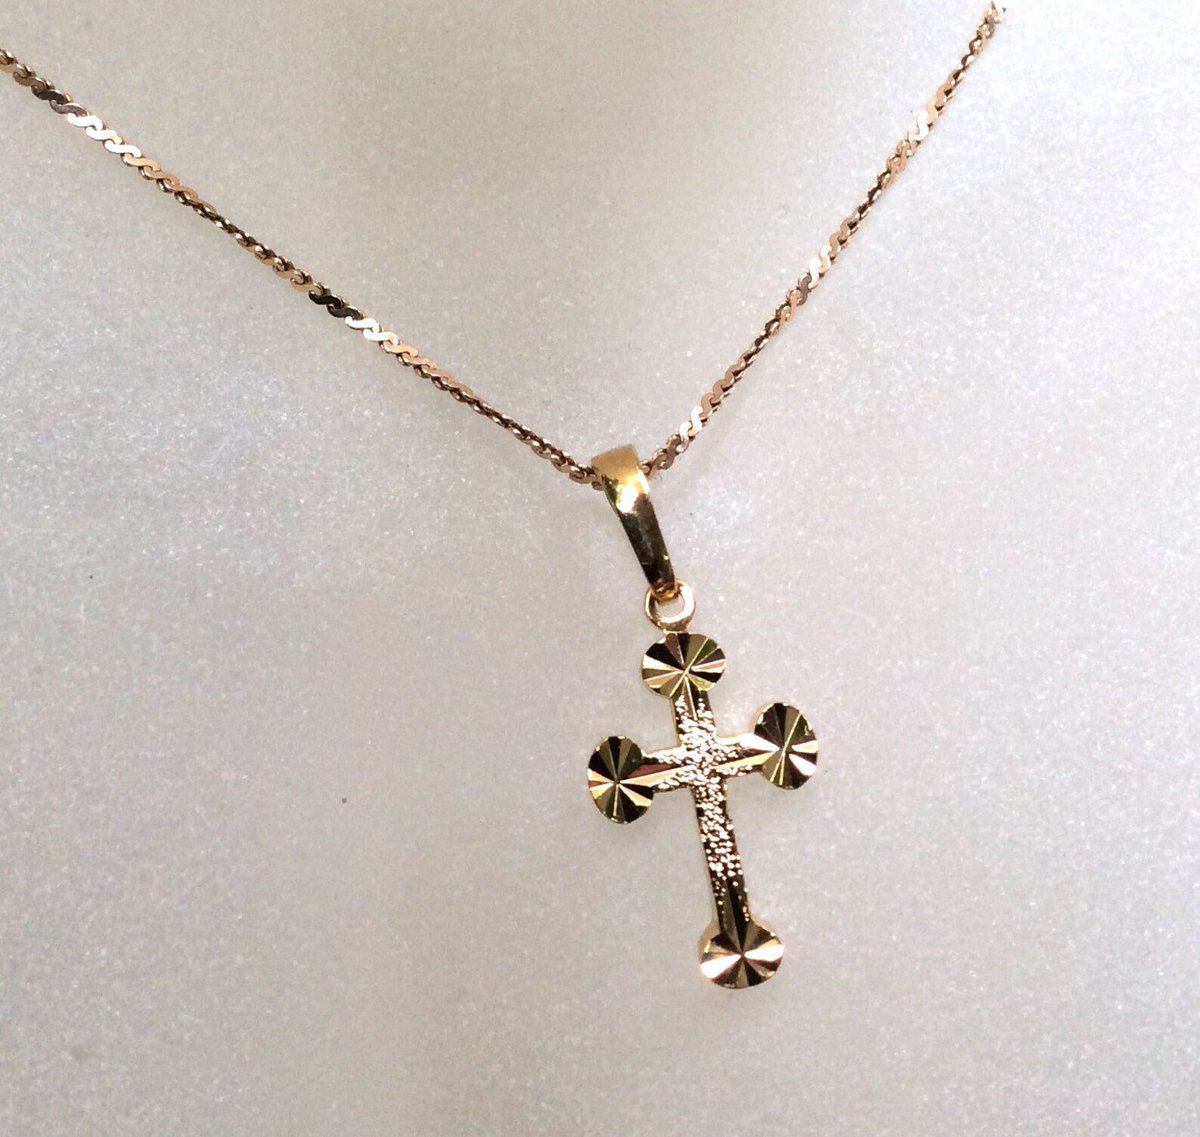 tiny gold Cross Necklace Xuping 10K Cross Easter religious Jewelry, Crow Vanity Canada, Free shipping sale #jewelry #jewelrygifts #giftsforher #crossnecklace #goldcrossnecklace #religiousgifts #giftsforchristians #etsyjewelry #etsyvintage #vintagejewelry